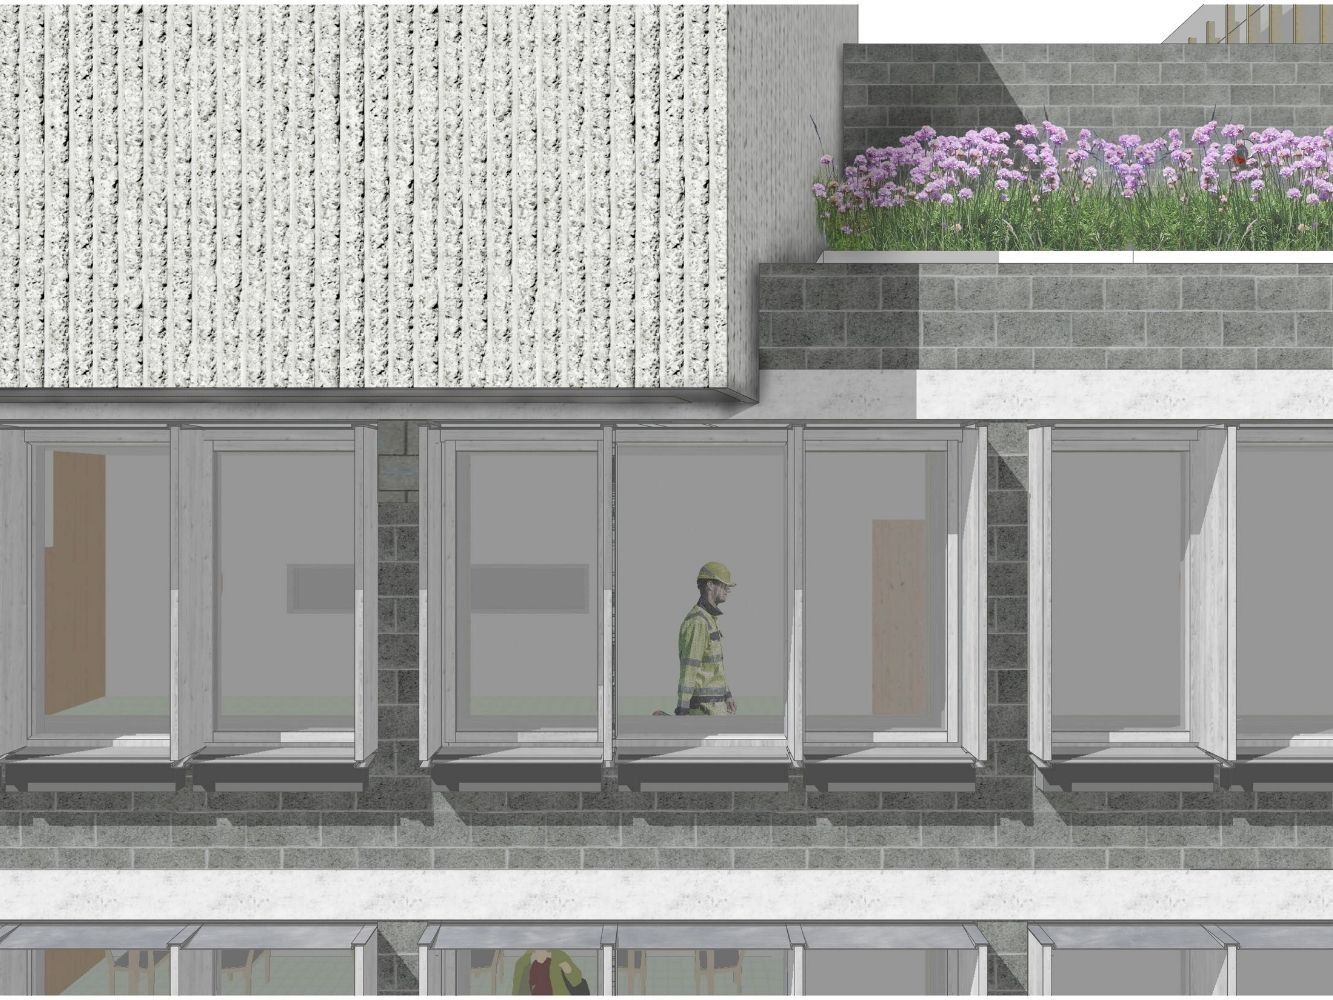 Architectural rendering of reimaging of Queen Street Police Station as a Sustainability Hub, exterior window